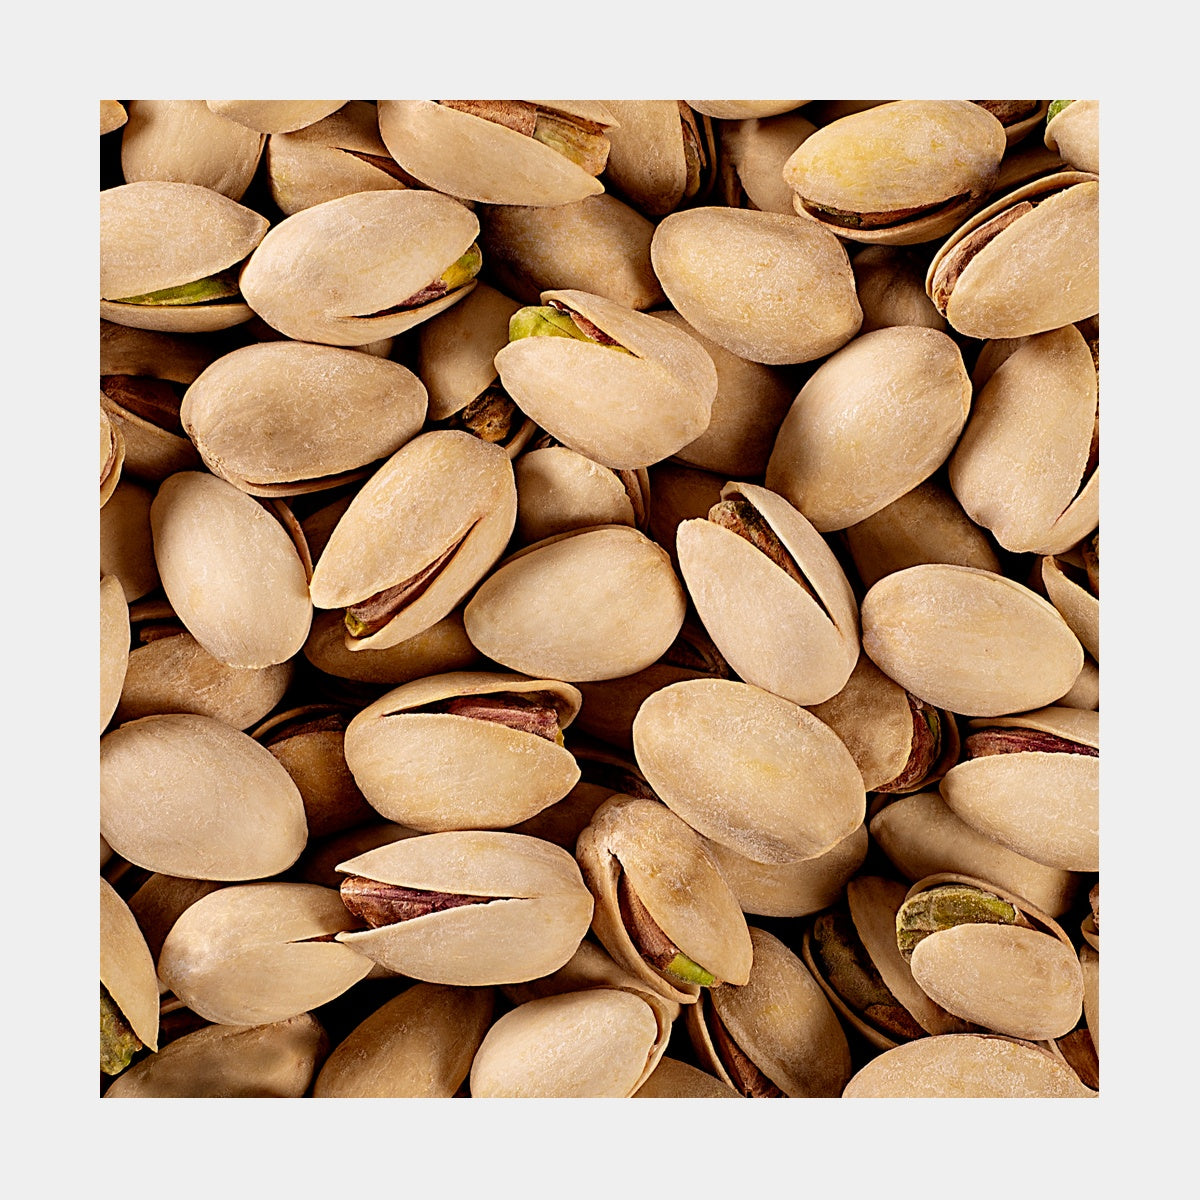 IN-SHELL PISTACHIOS 6oz